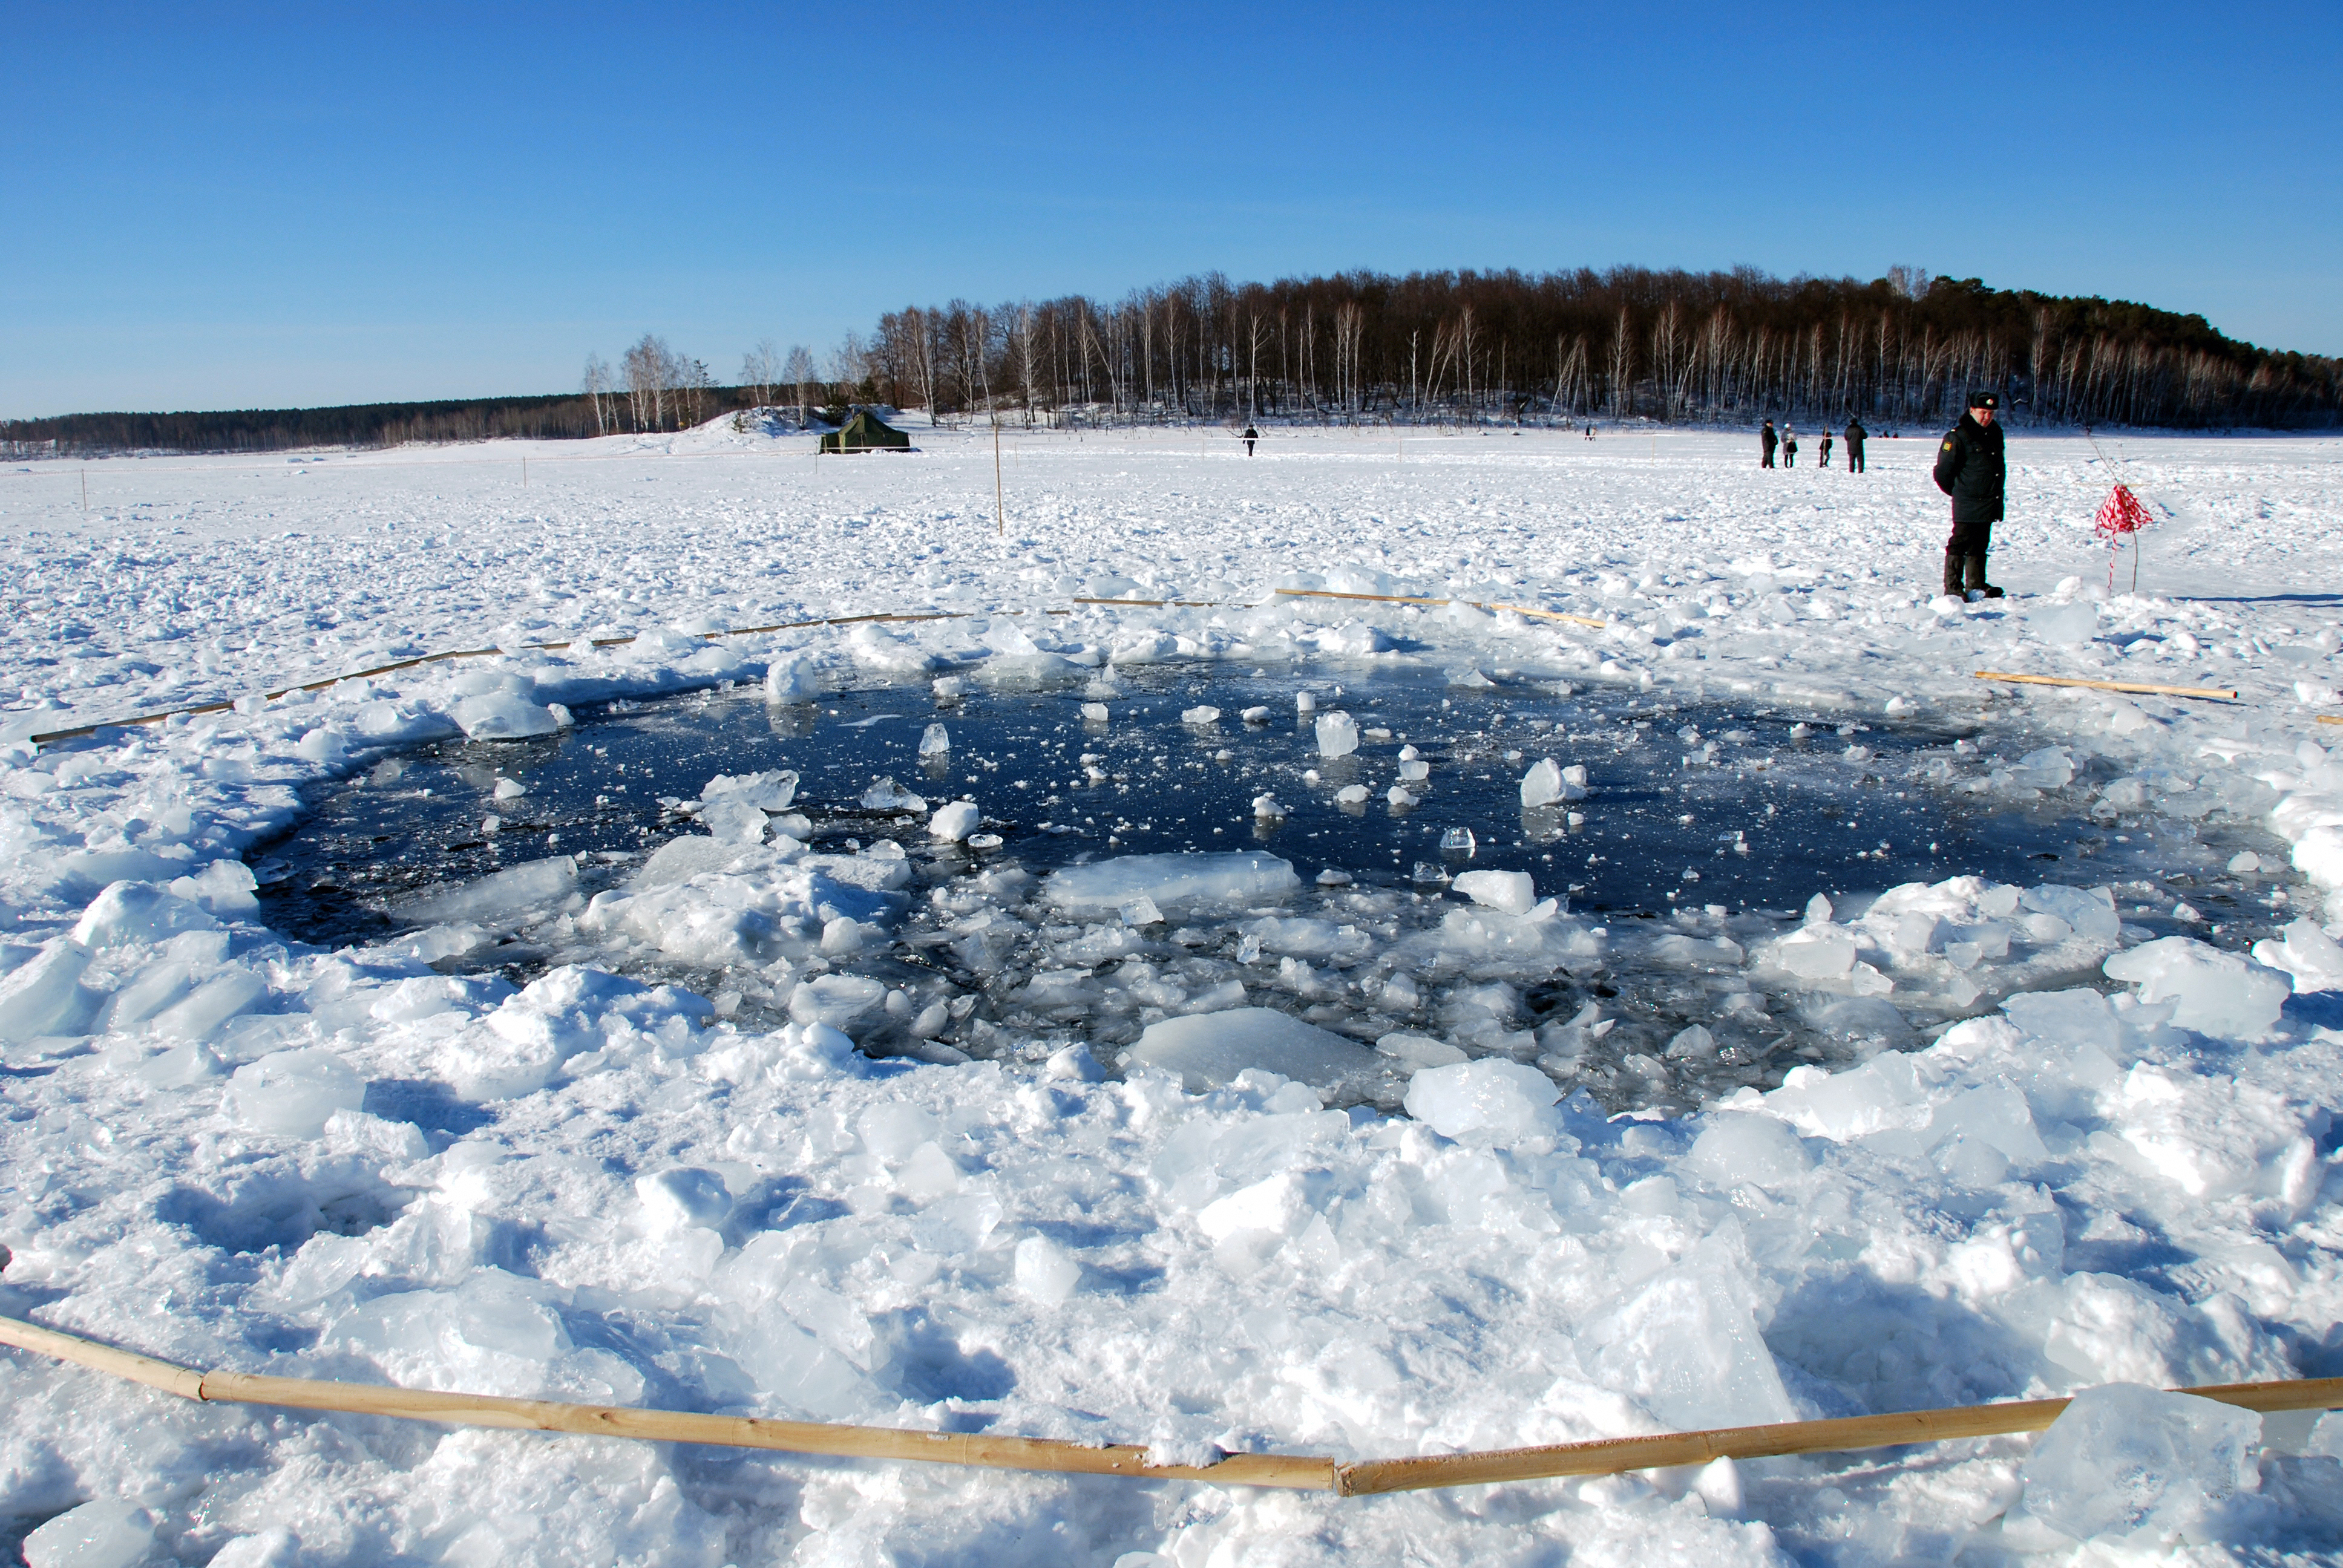 A hole, believed to have been made by the meteor fragment in the ice of Lake Chebarkul, is seen on February 16, 2013, about 80 kilometers from Chelyabinsk, Russia.  The local government reported more than 1,100 people injured, mostly from shards of glass shattered by the shock wave from the meteor's explosion.